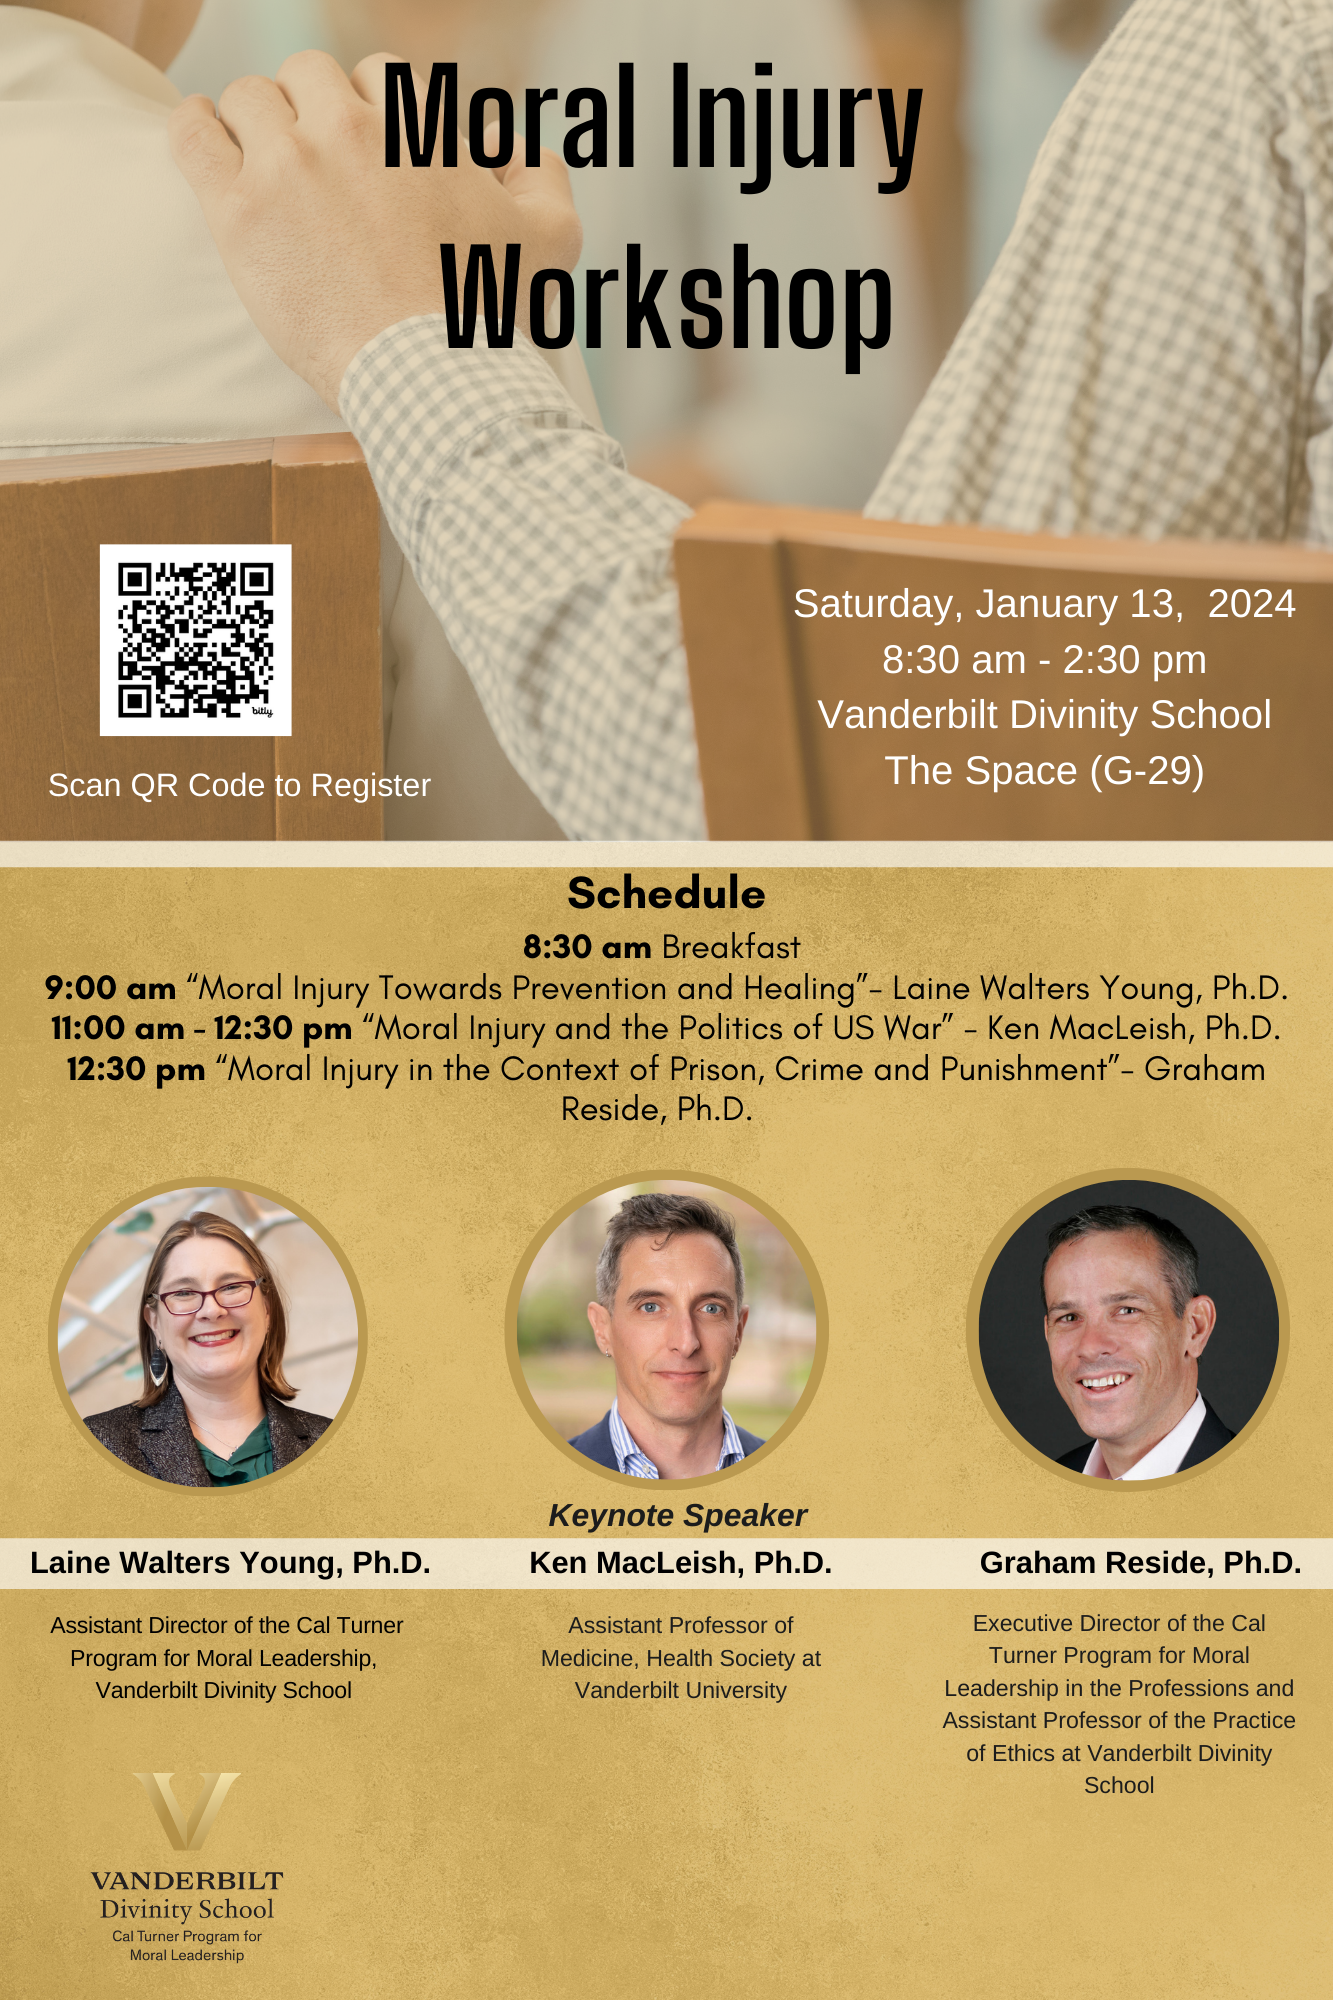 This is a poster for an event the text reads: Moral Injury Workshop, Saturday, January 13th , 2024 8:30am-2:30pm Vanderbilt Divinity School. Schedule: 8:30am Breakfast, 9:00 am 